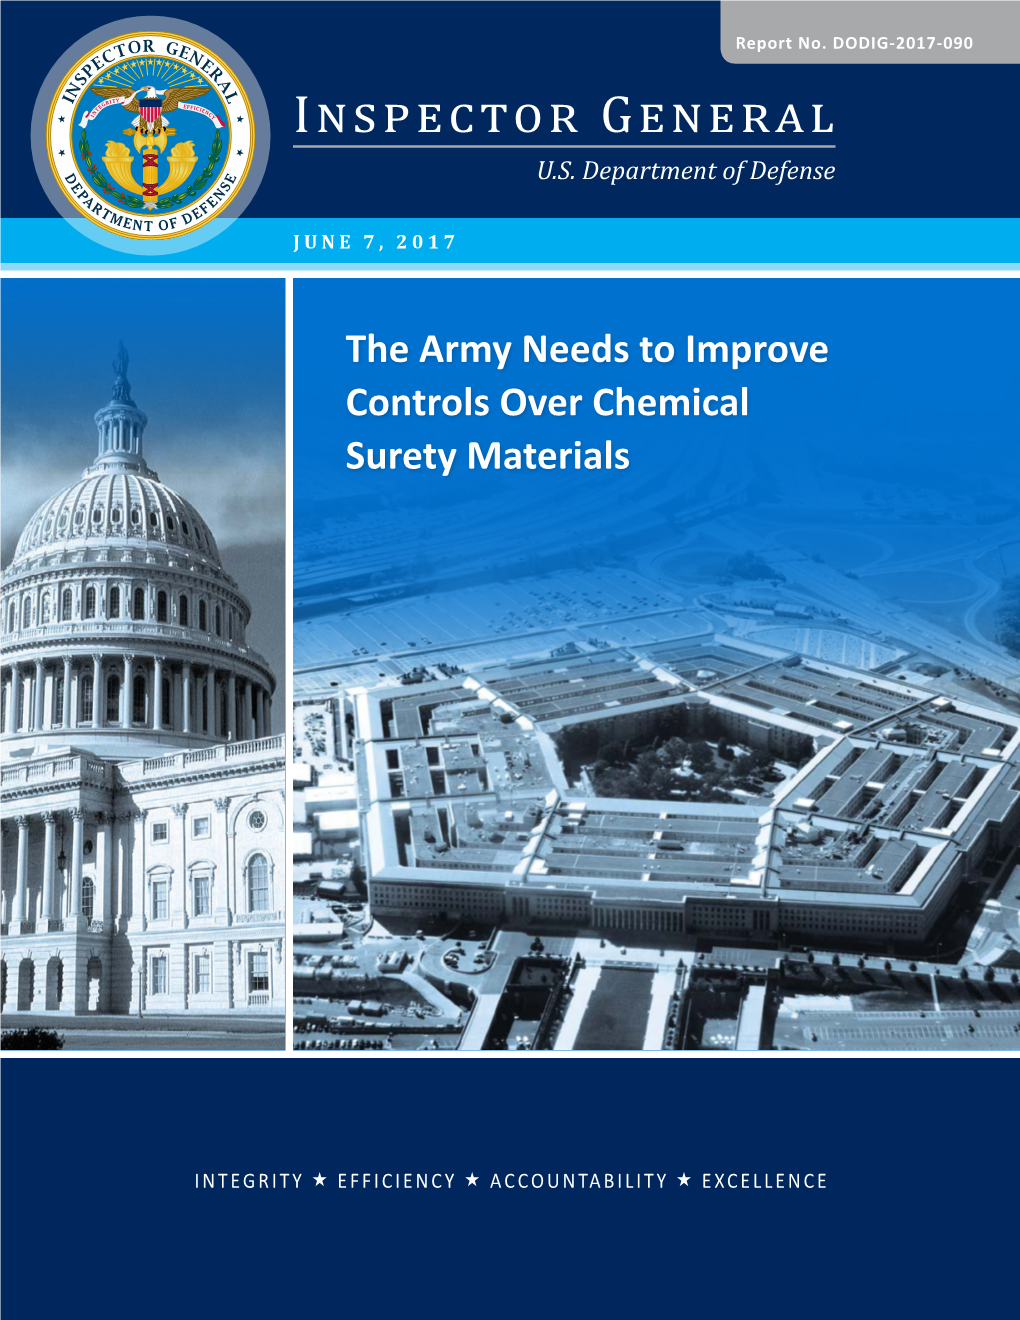 The Army Needs to Improve Controls Over Chemical Surety Materials